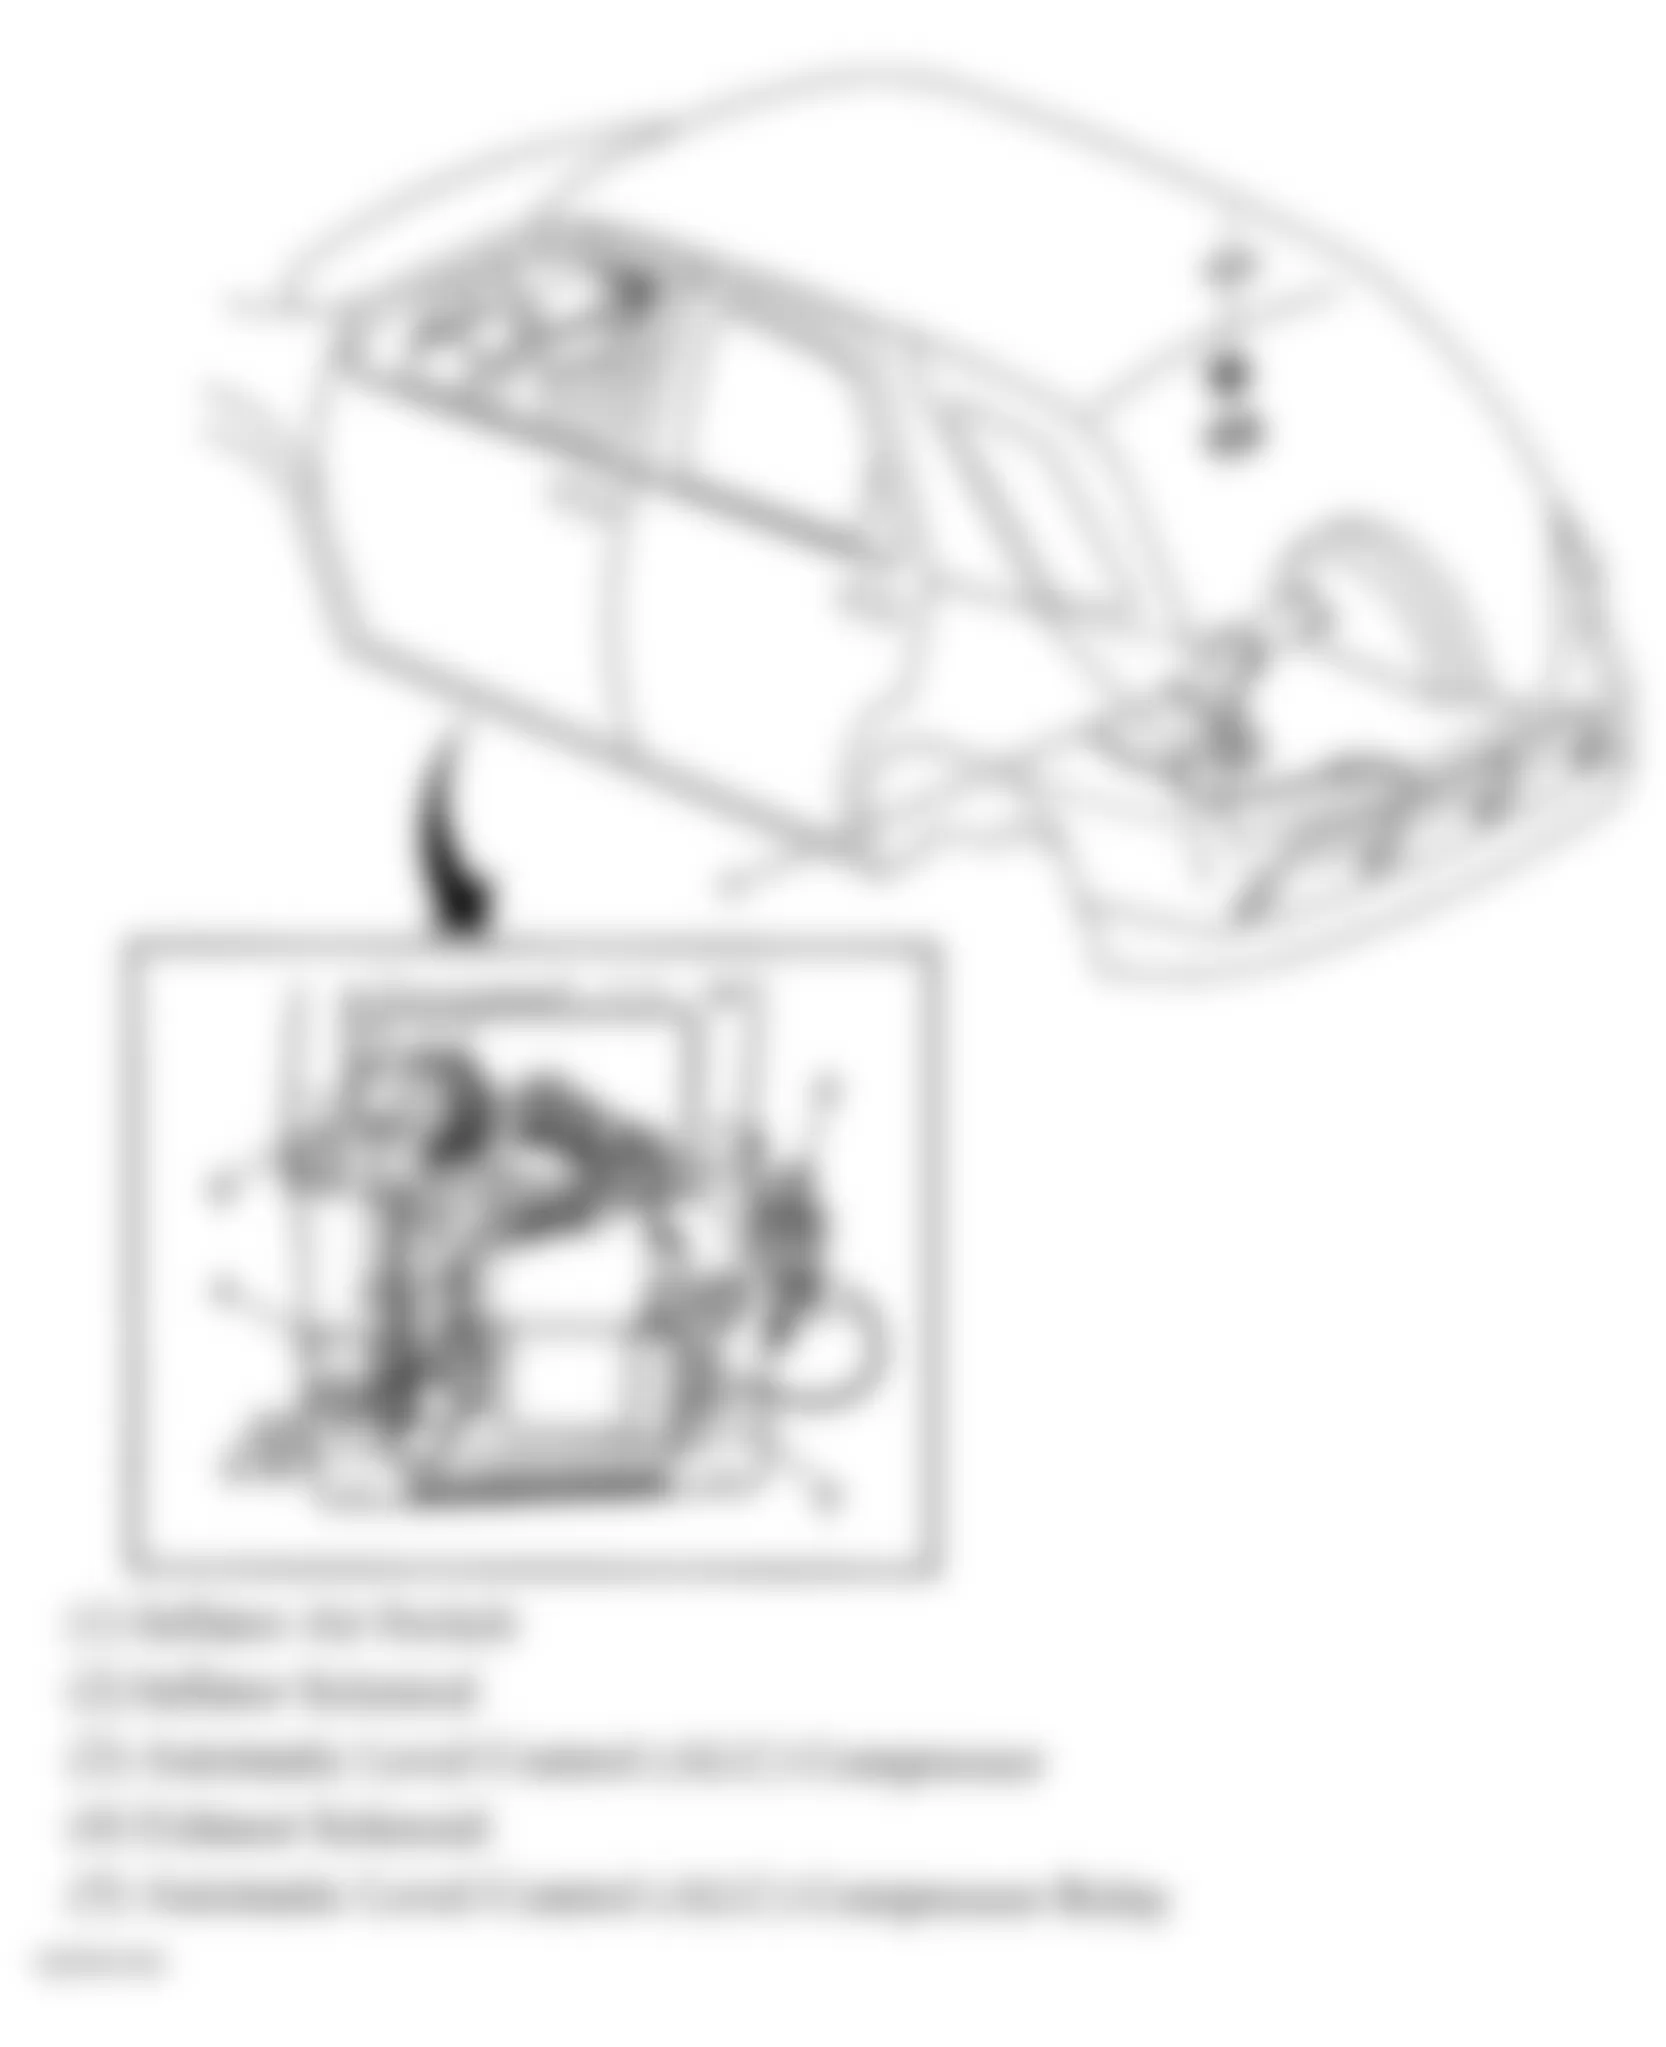 Buick Rendezvous CX 2005 - Component Locations -  Rear Of Vehicle